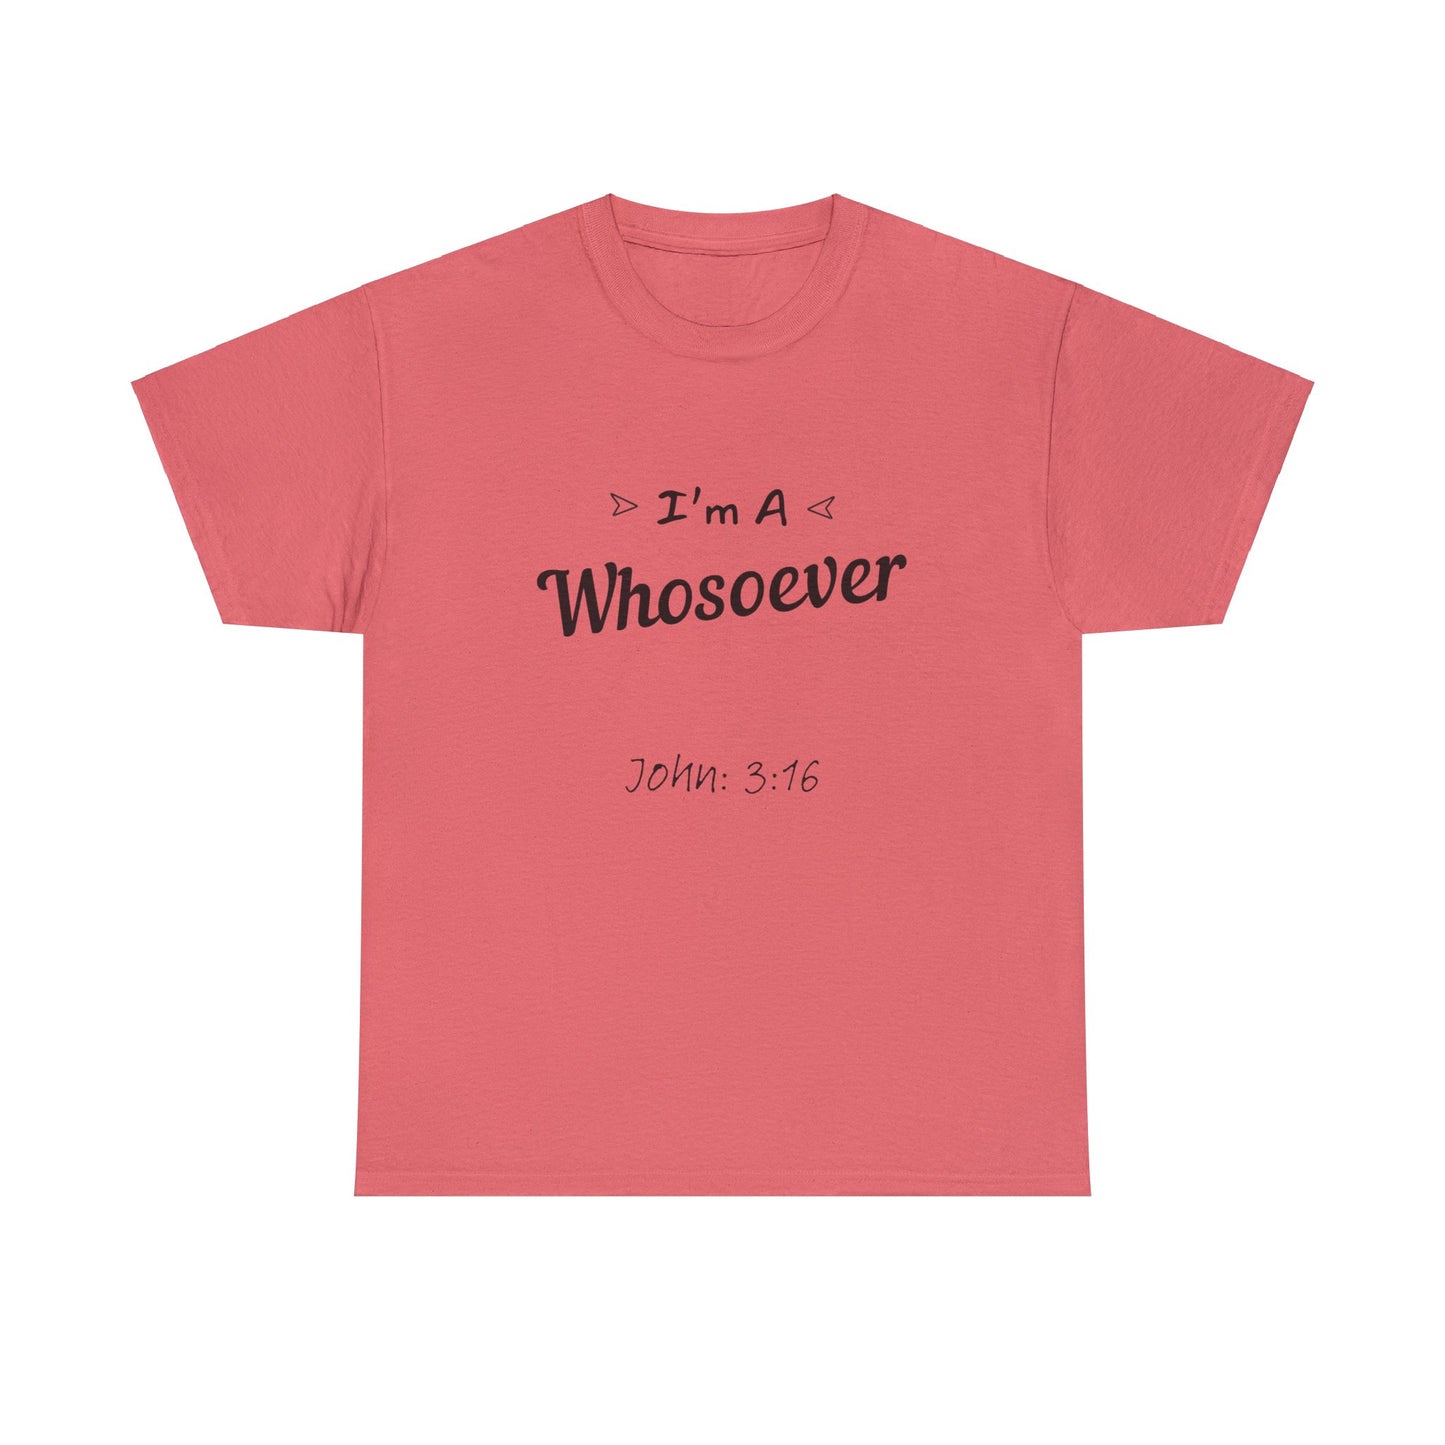 "Religious T-shirt 'I'm a Whosoever' from John 3:16 in various sizes."